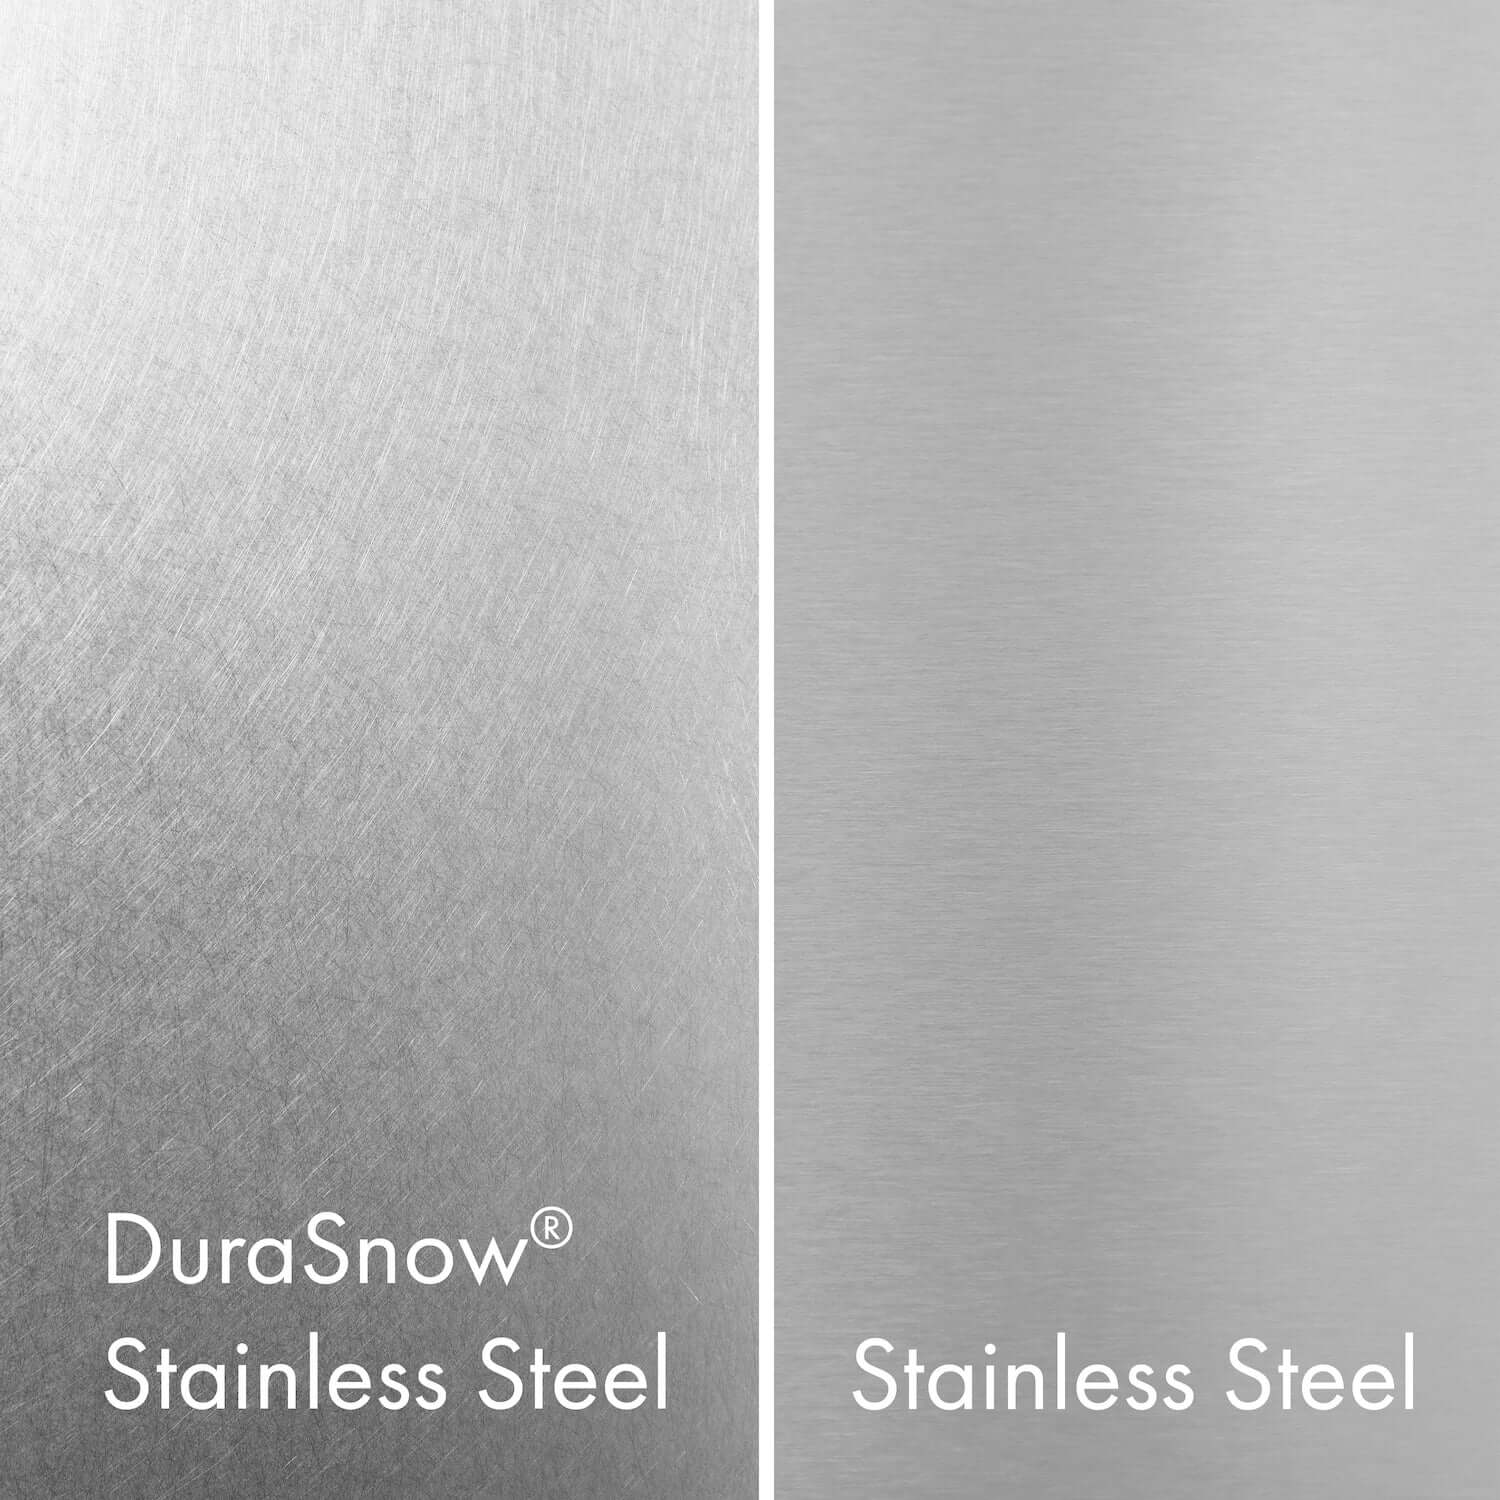 ZLINE's proprietary fingerprint-resistant DuraSnow® Stainless Steel (left) compared with Standard Stainless Steel (right).